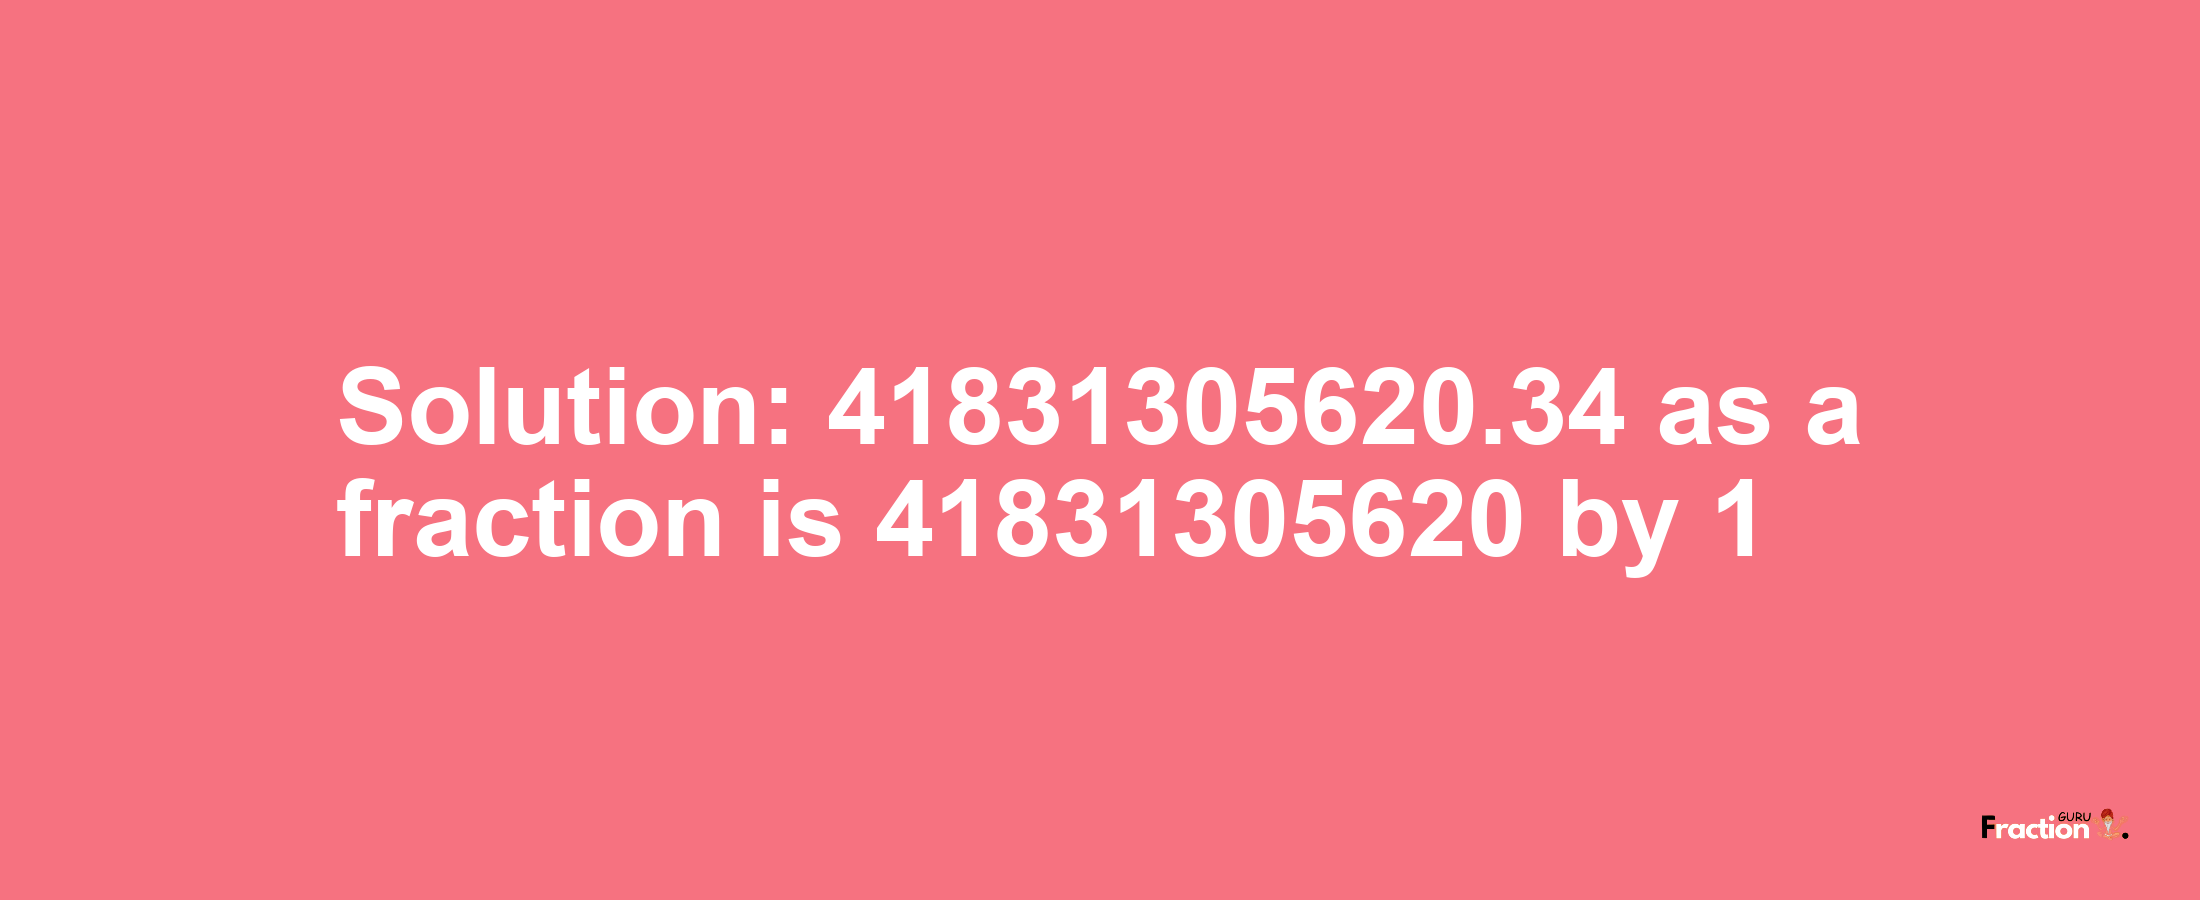 Solution:41831305620.34 as a fraction is 41831305620/1